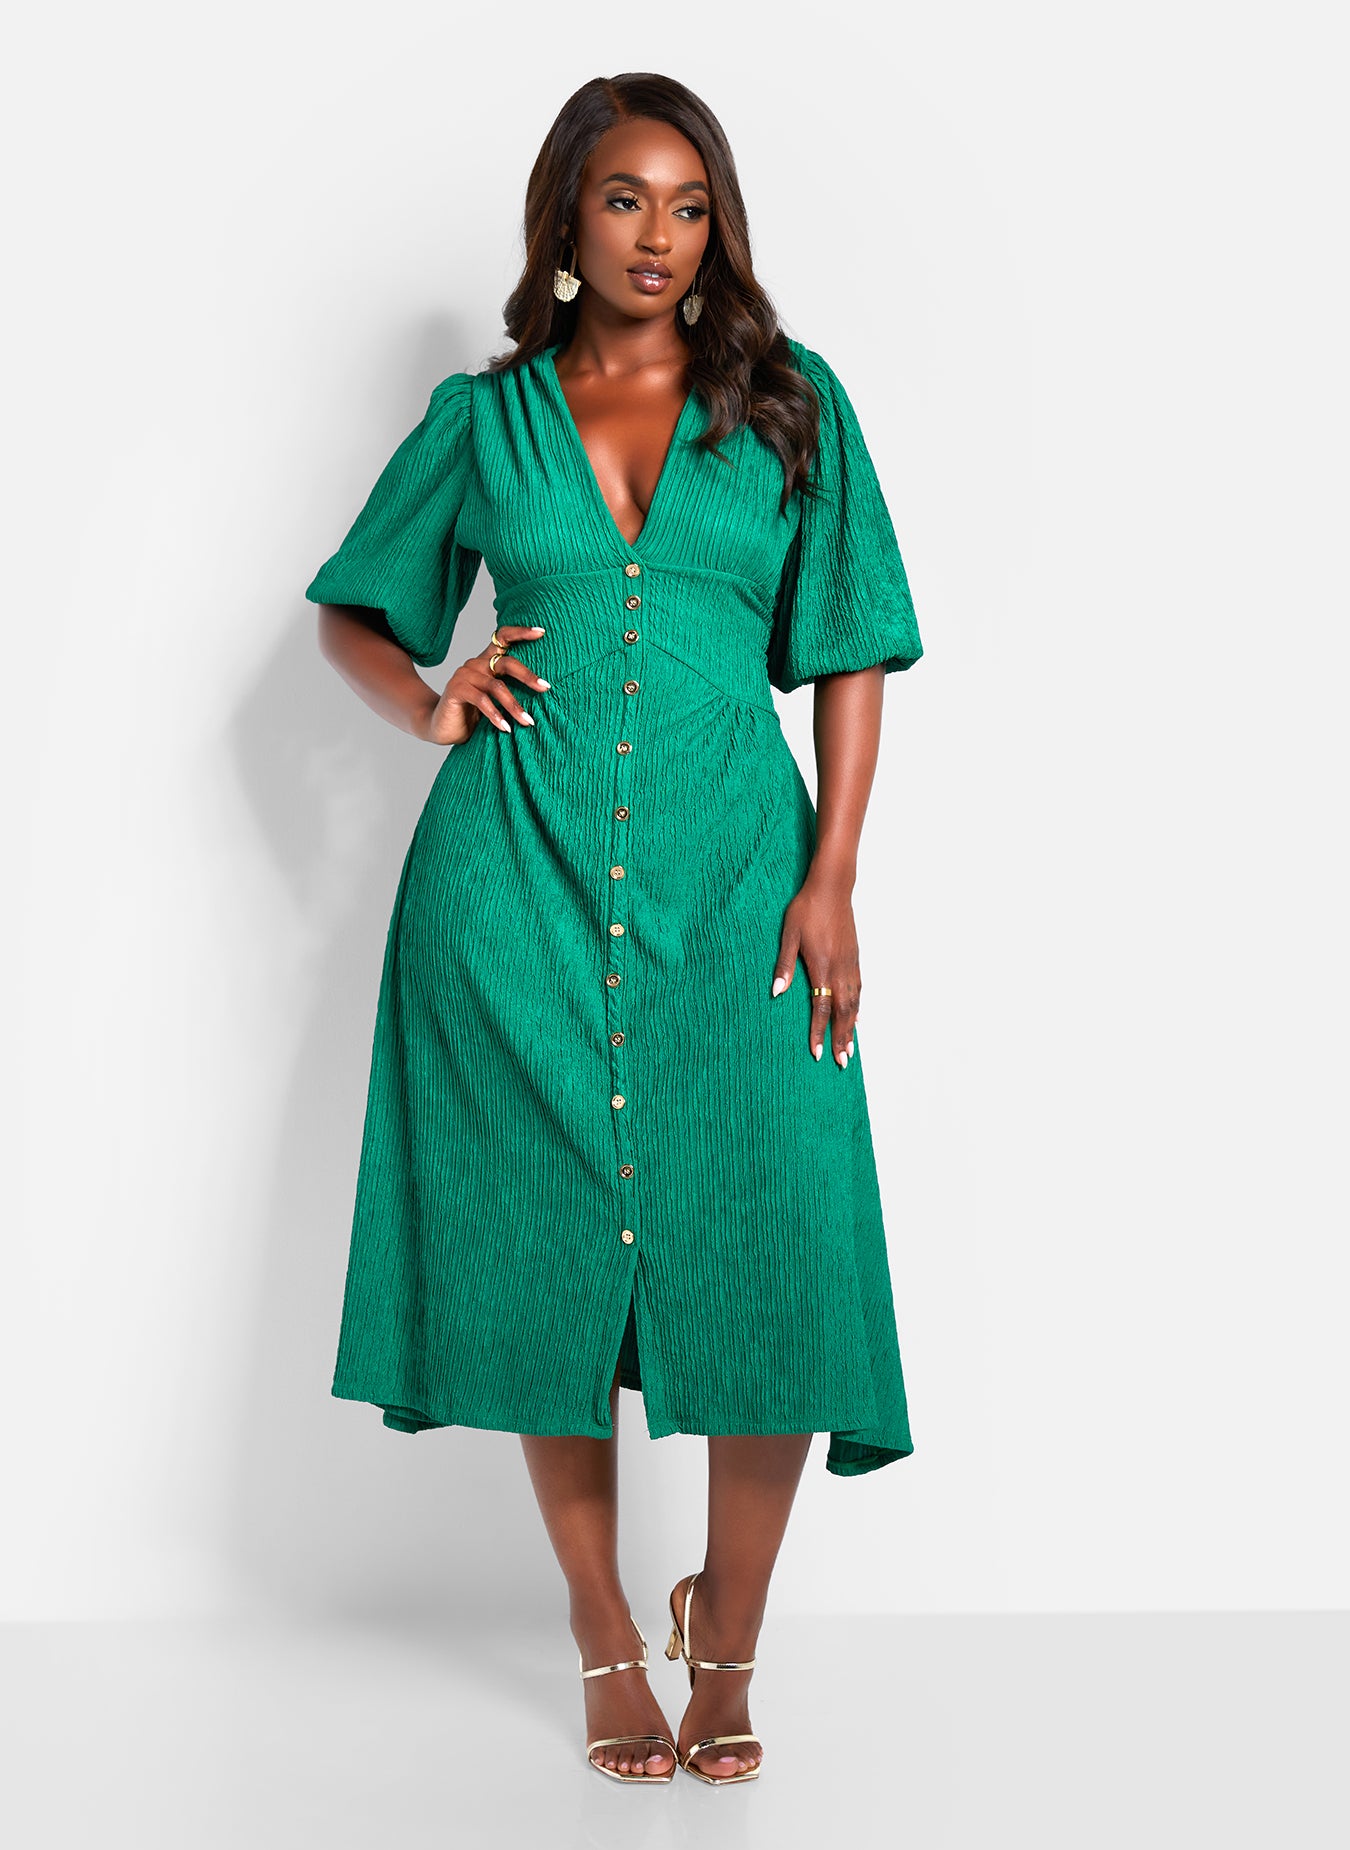 REBDOLLS | Size Inclusive Women's Clothing and Accessories